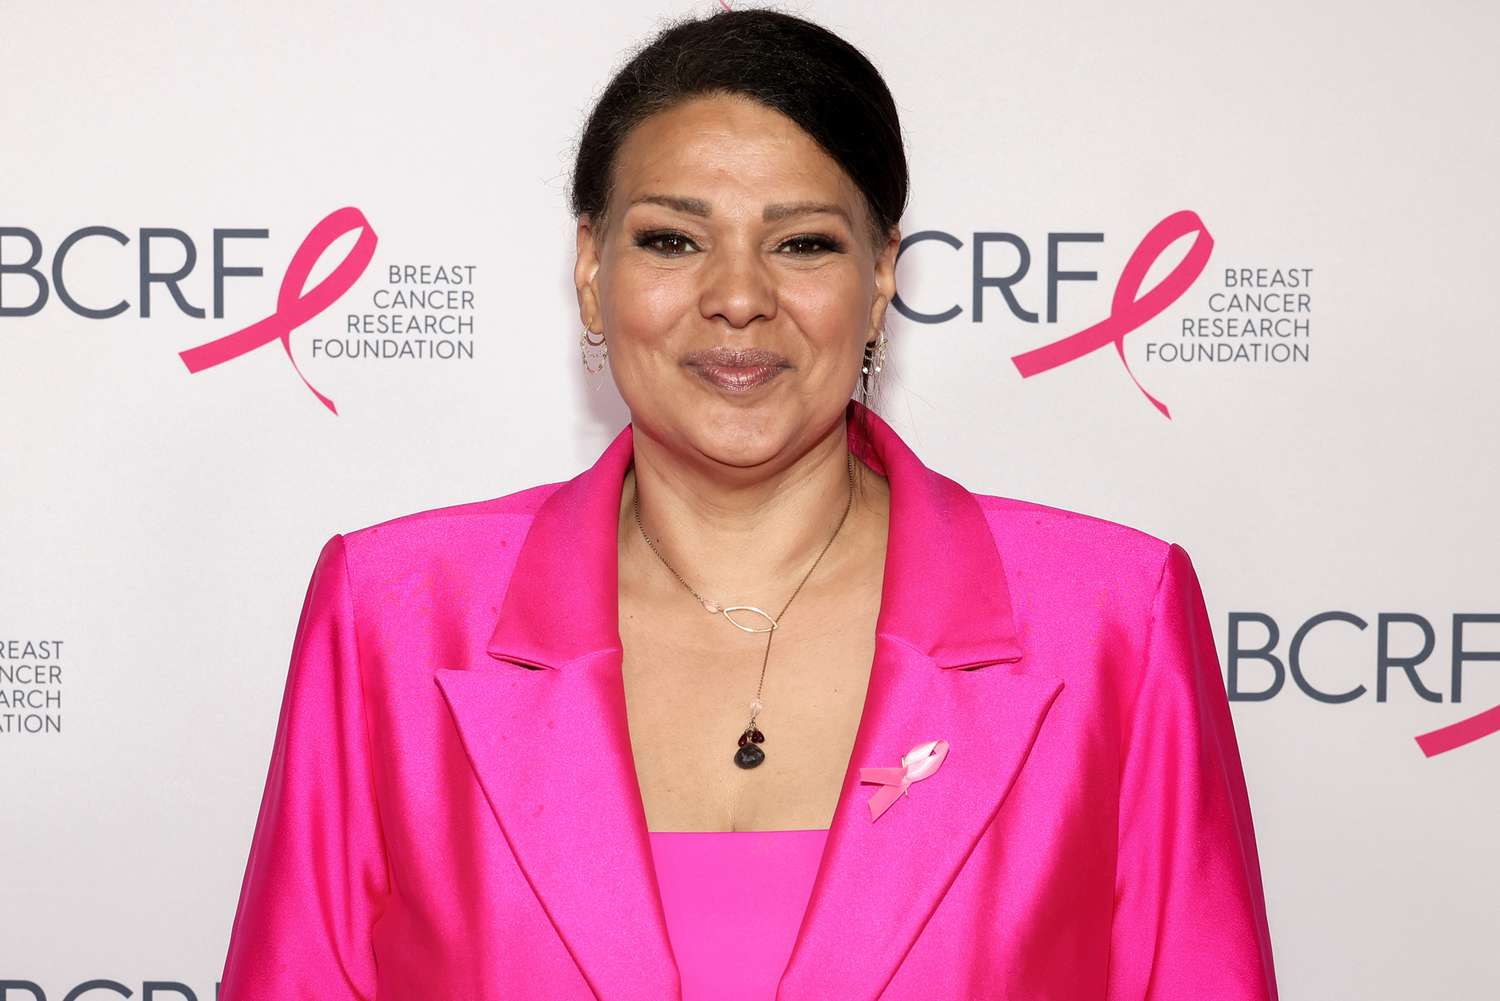 Sara Sidner Reveals Shes Undergoing Double Mastectomy to Treat Cancer [Video]